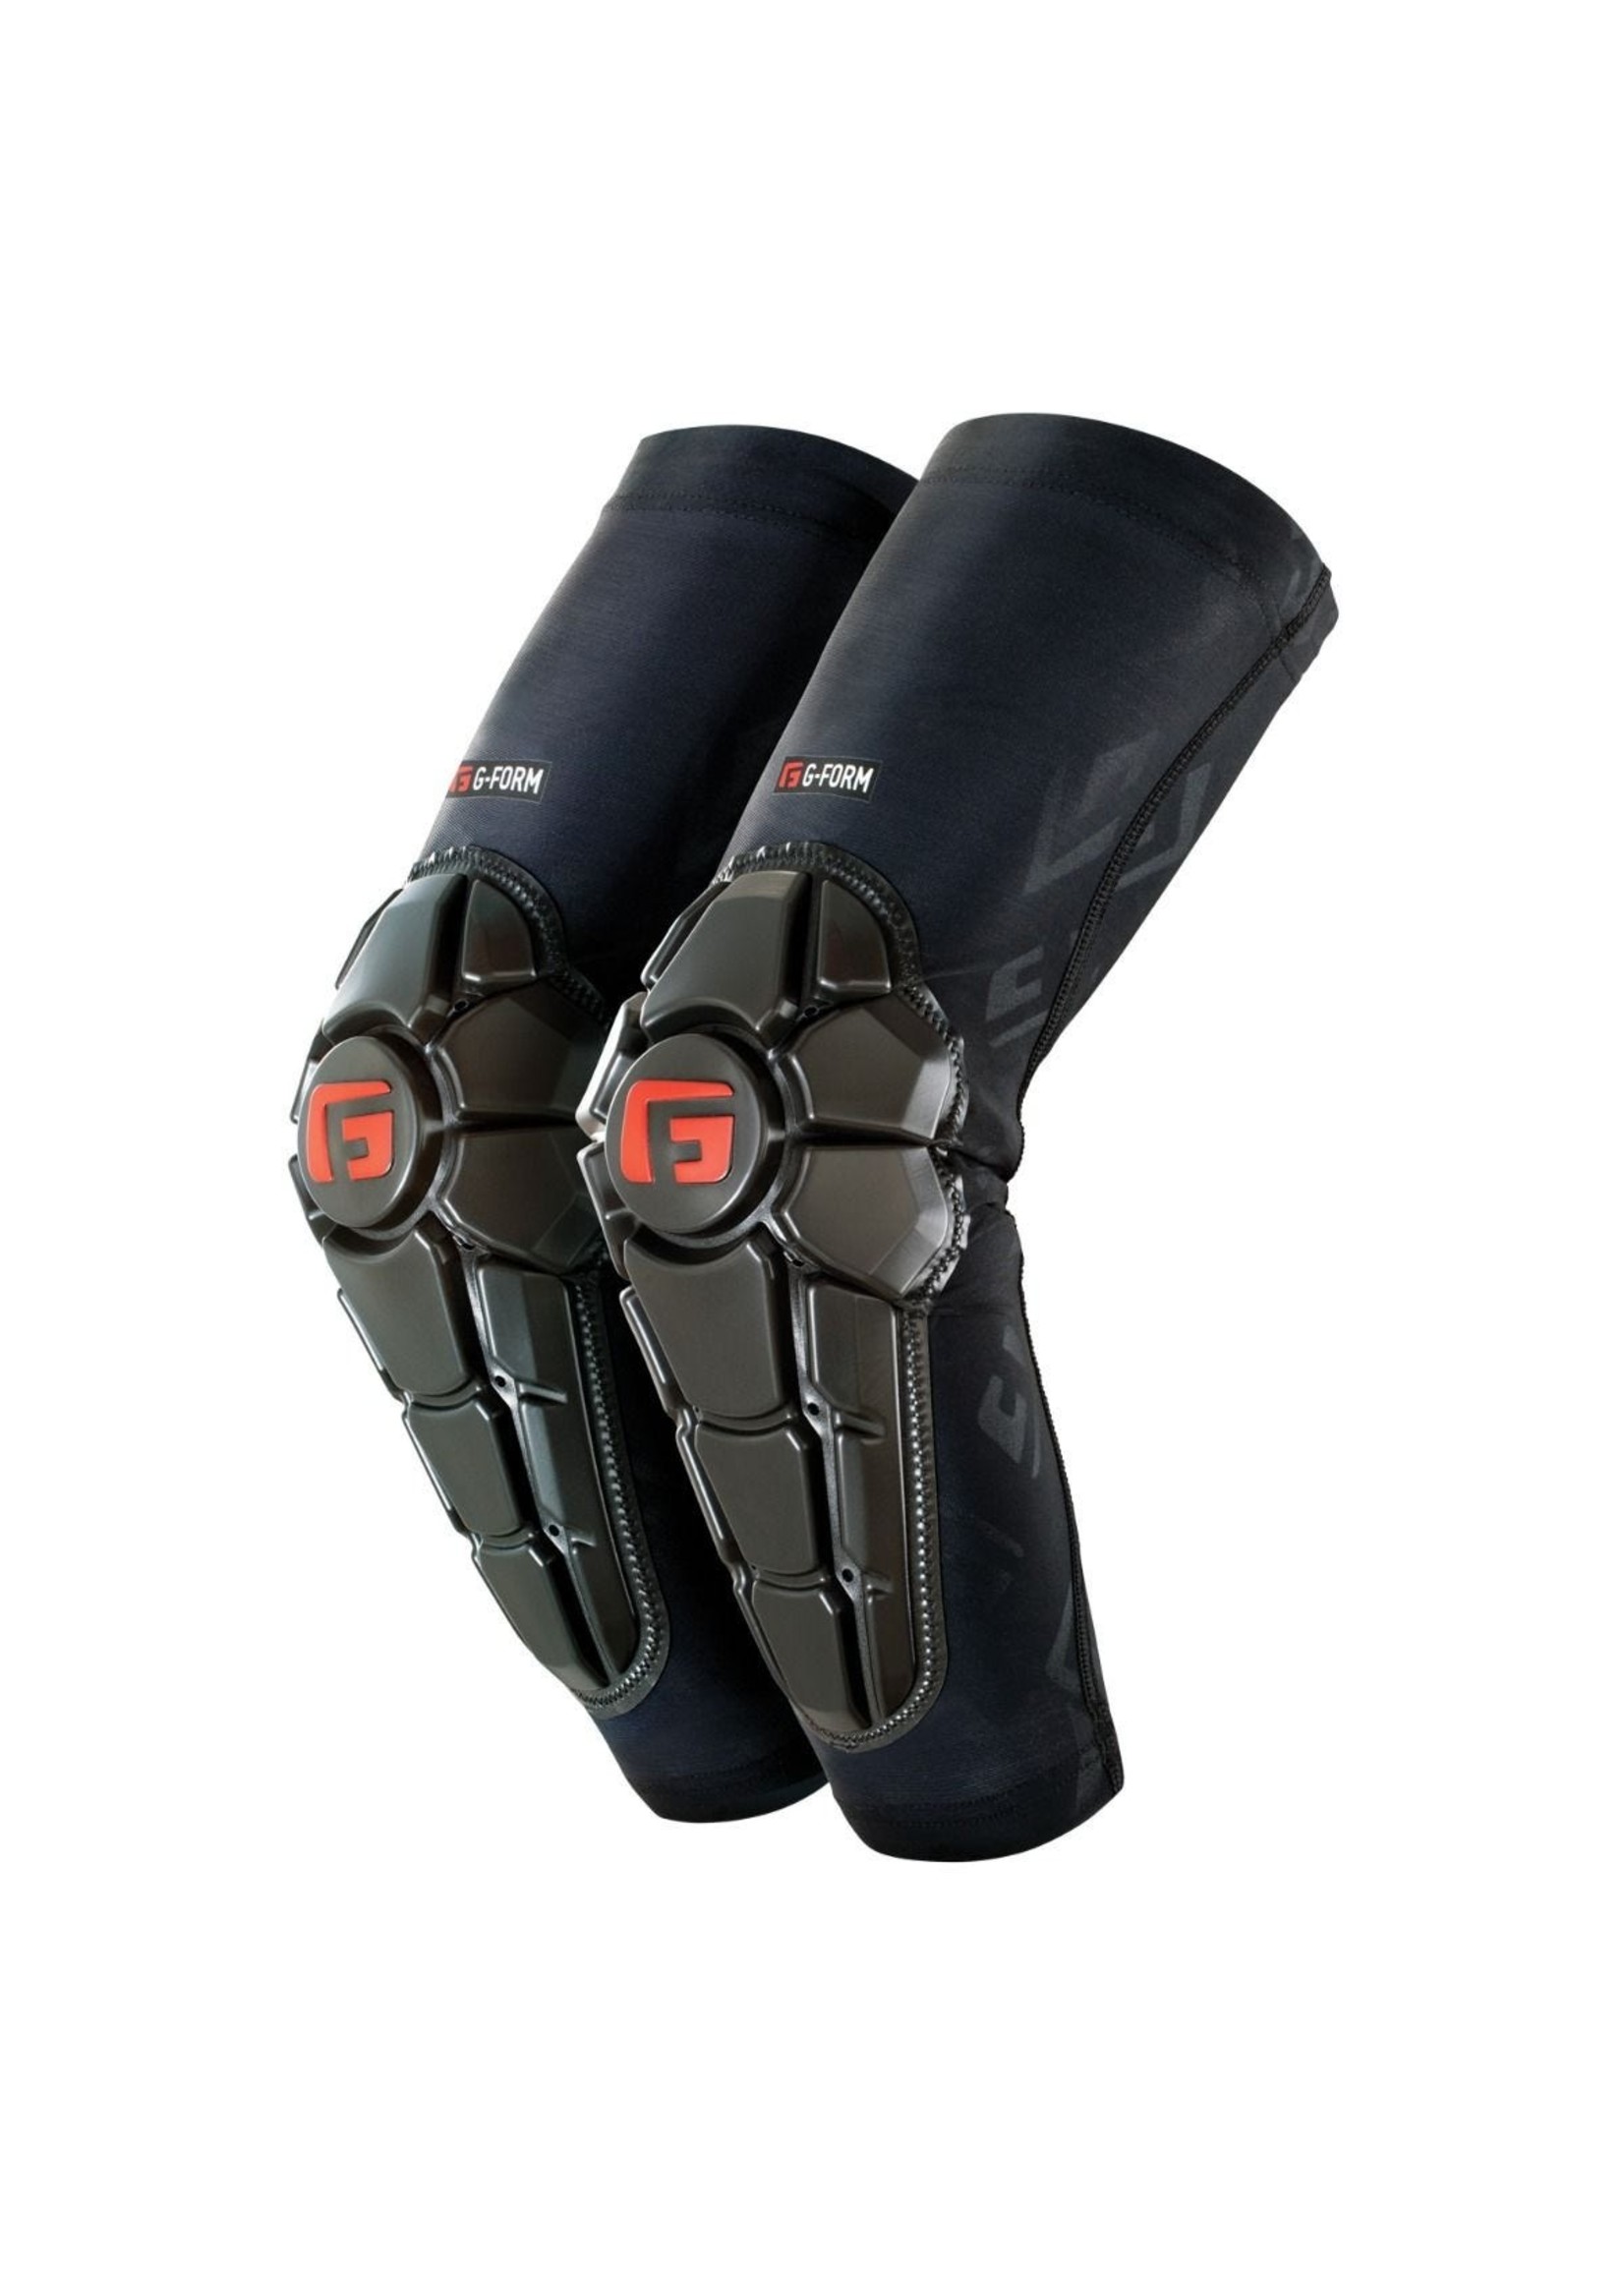 G-Form G-Form Pro-X2 Elbow / Forearm Guard,